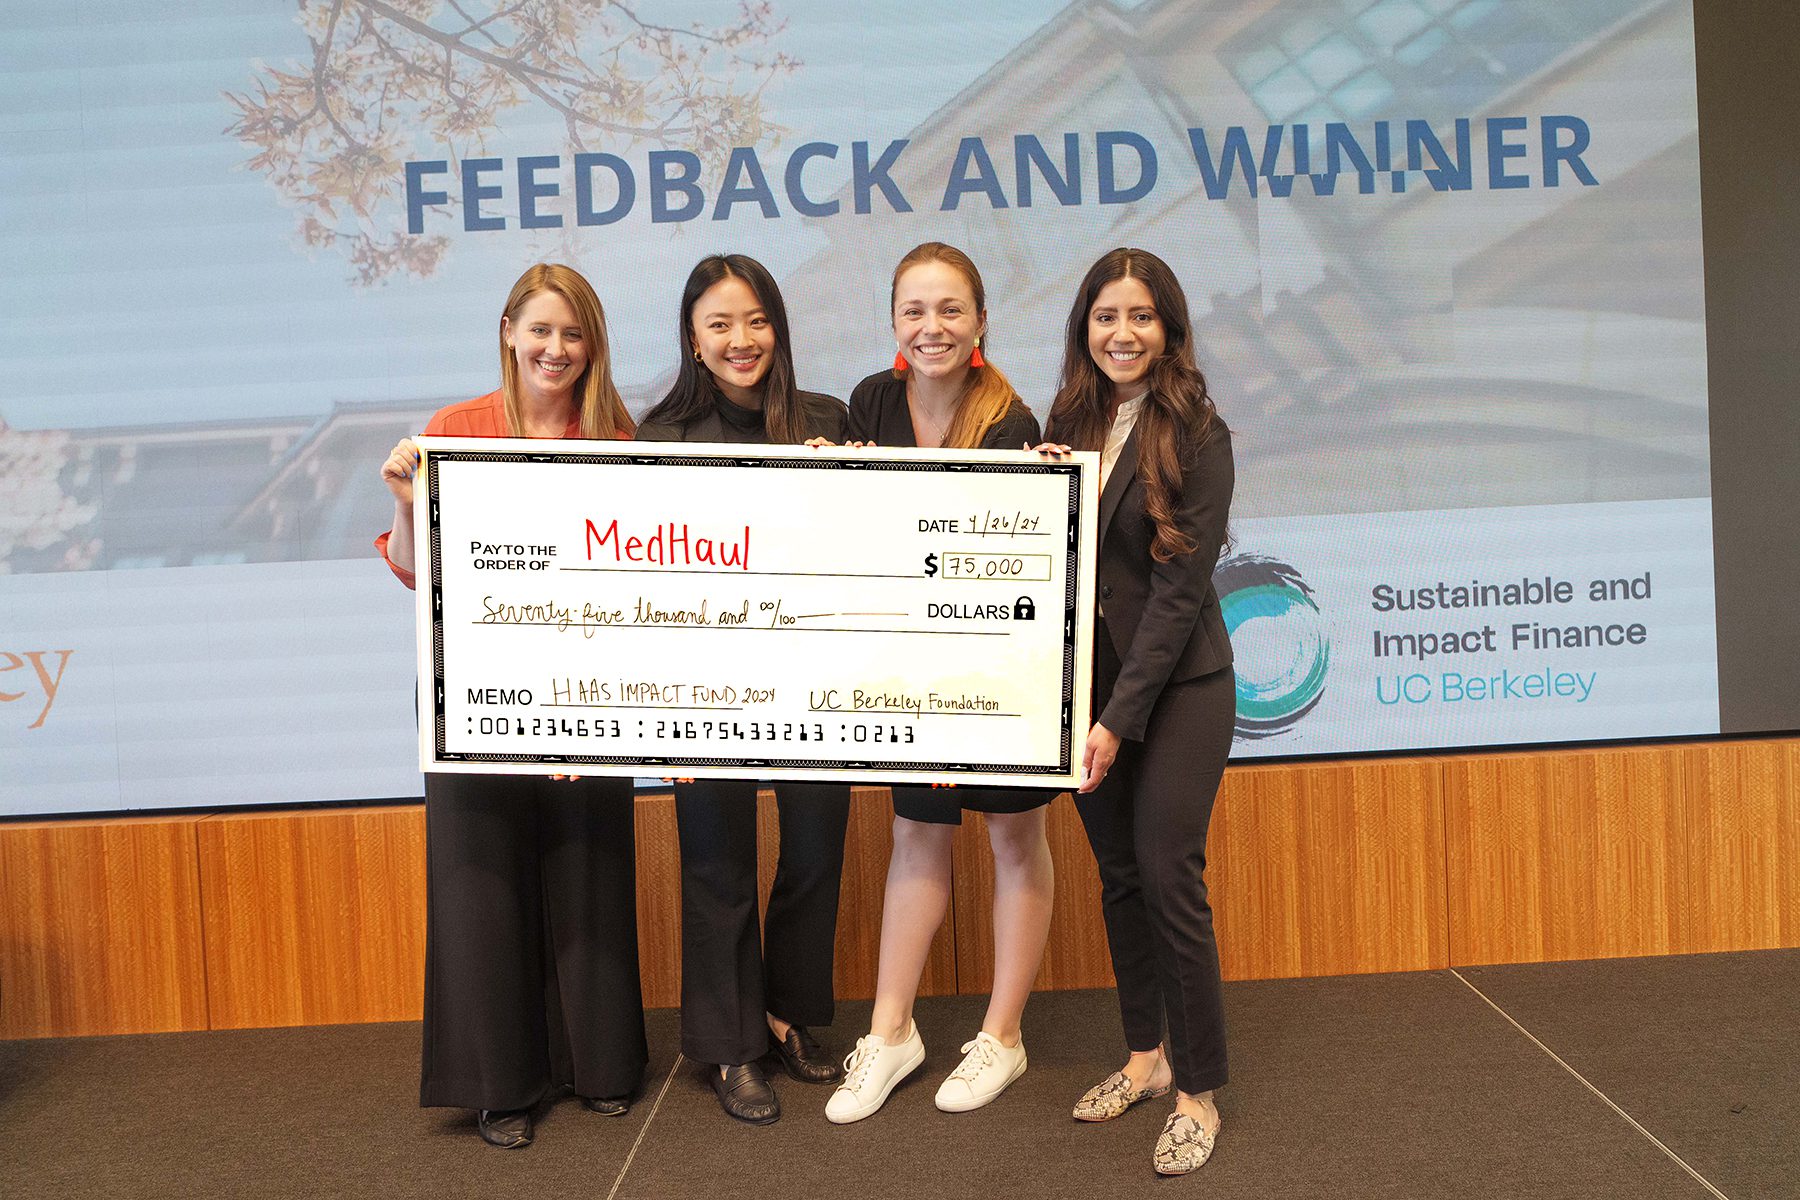 One winning team, pitching on behalf of startup MedHaul, included Lauren Zinser, MBA 24, Amy Cui, MBA 25, Crystal Gaeta, MBA 24, and Rosana Rabines, EWMBA 25.